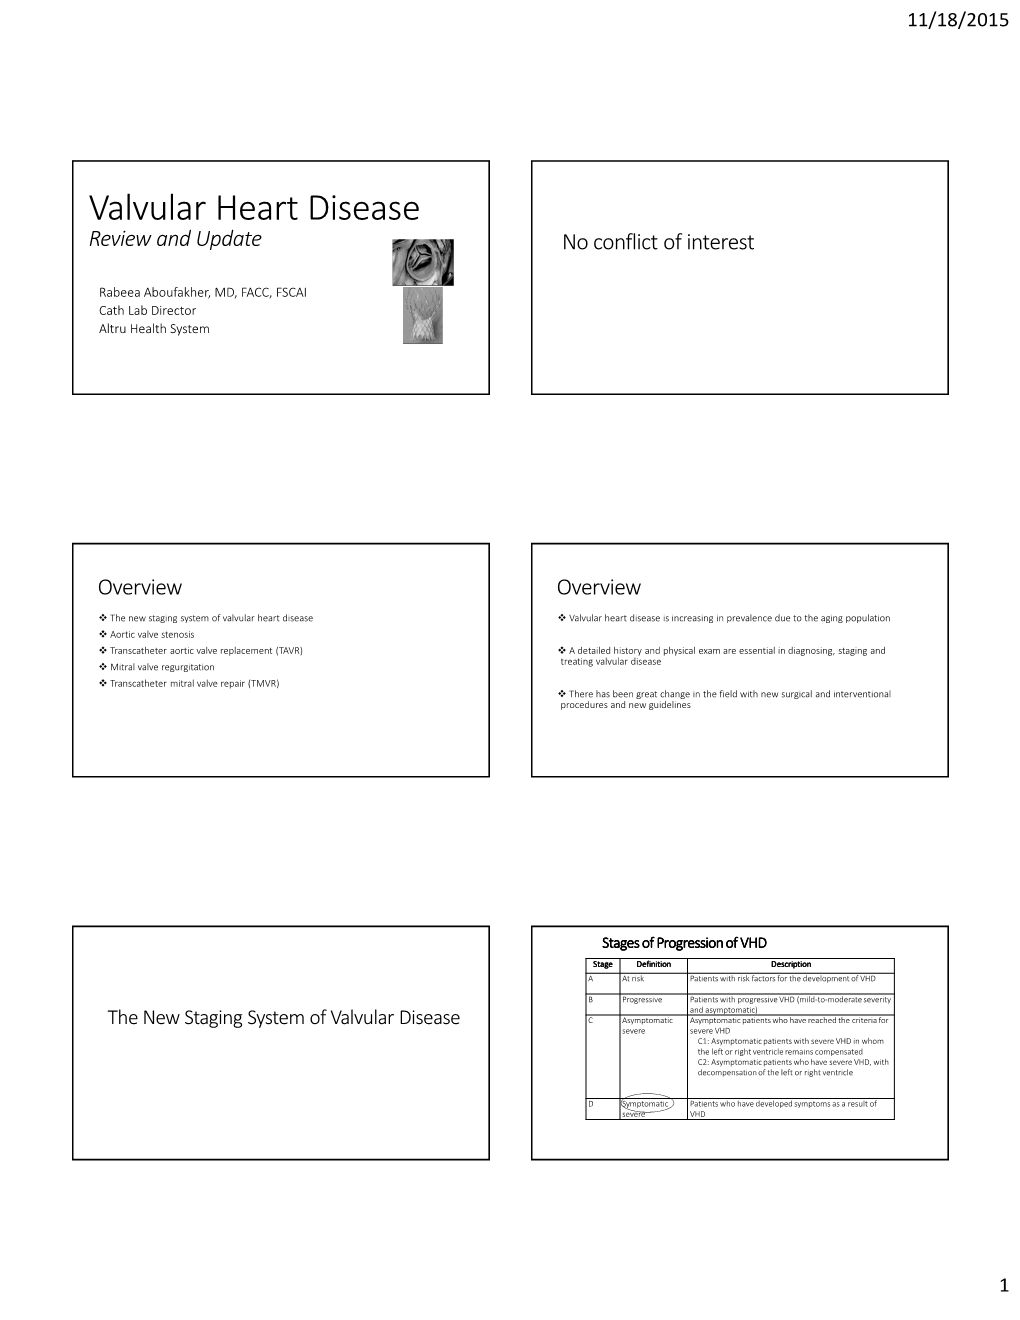 Valvular Heart Disease Review and Update No Conflict of Interest